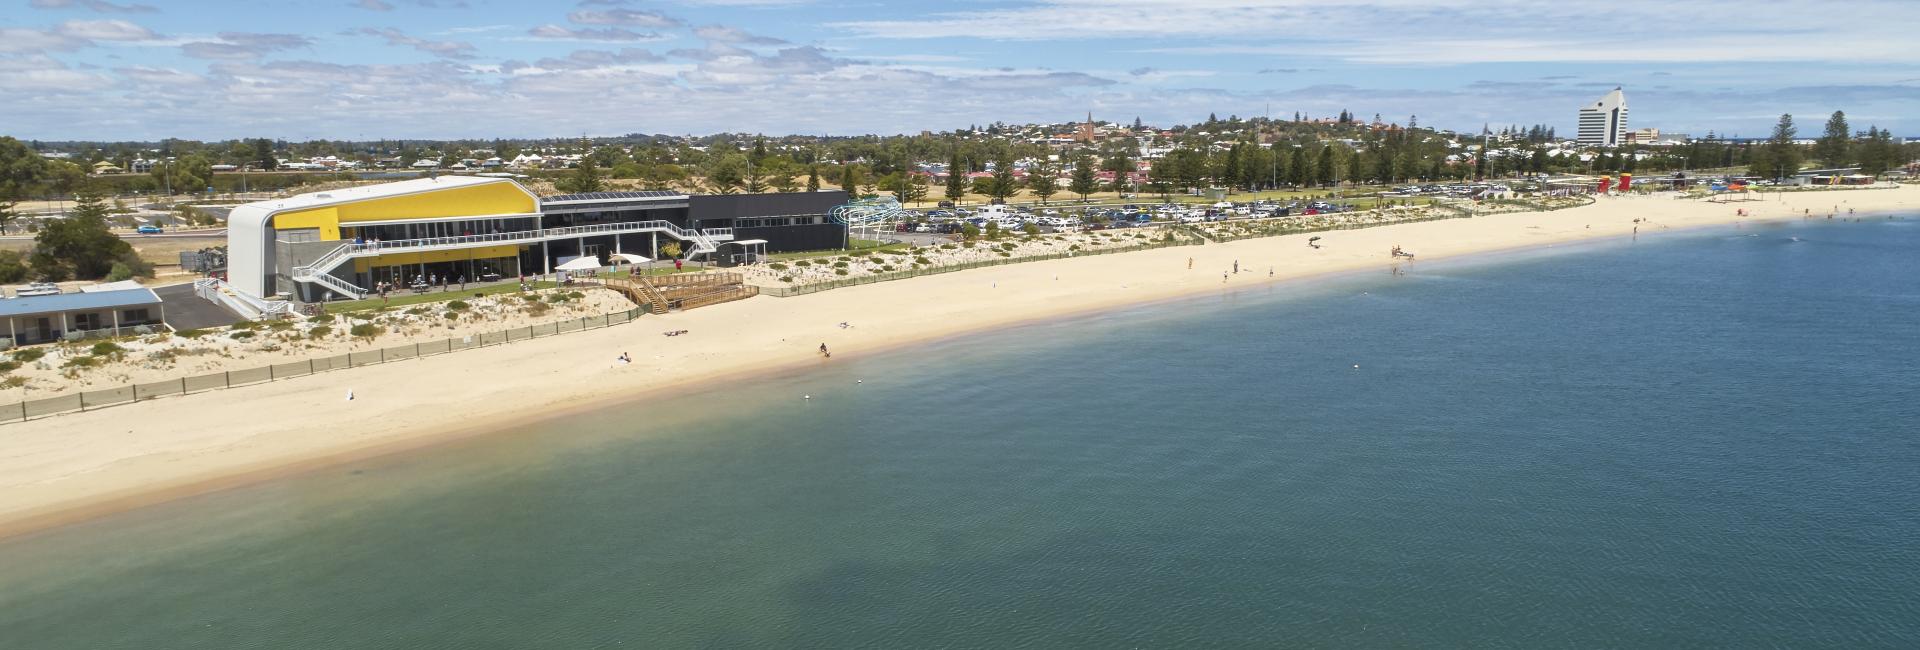 drone image showing Koombana Bay foreshore in Bunbury with city in background